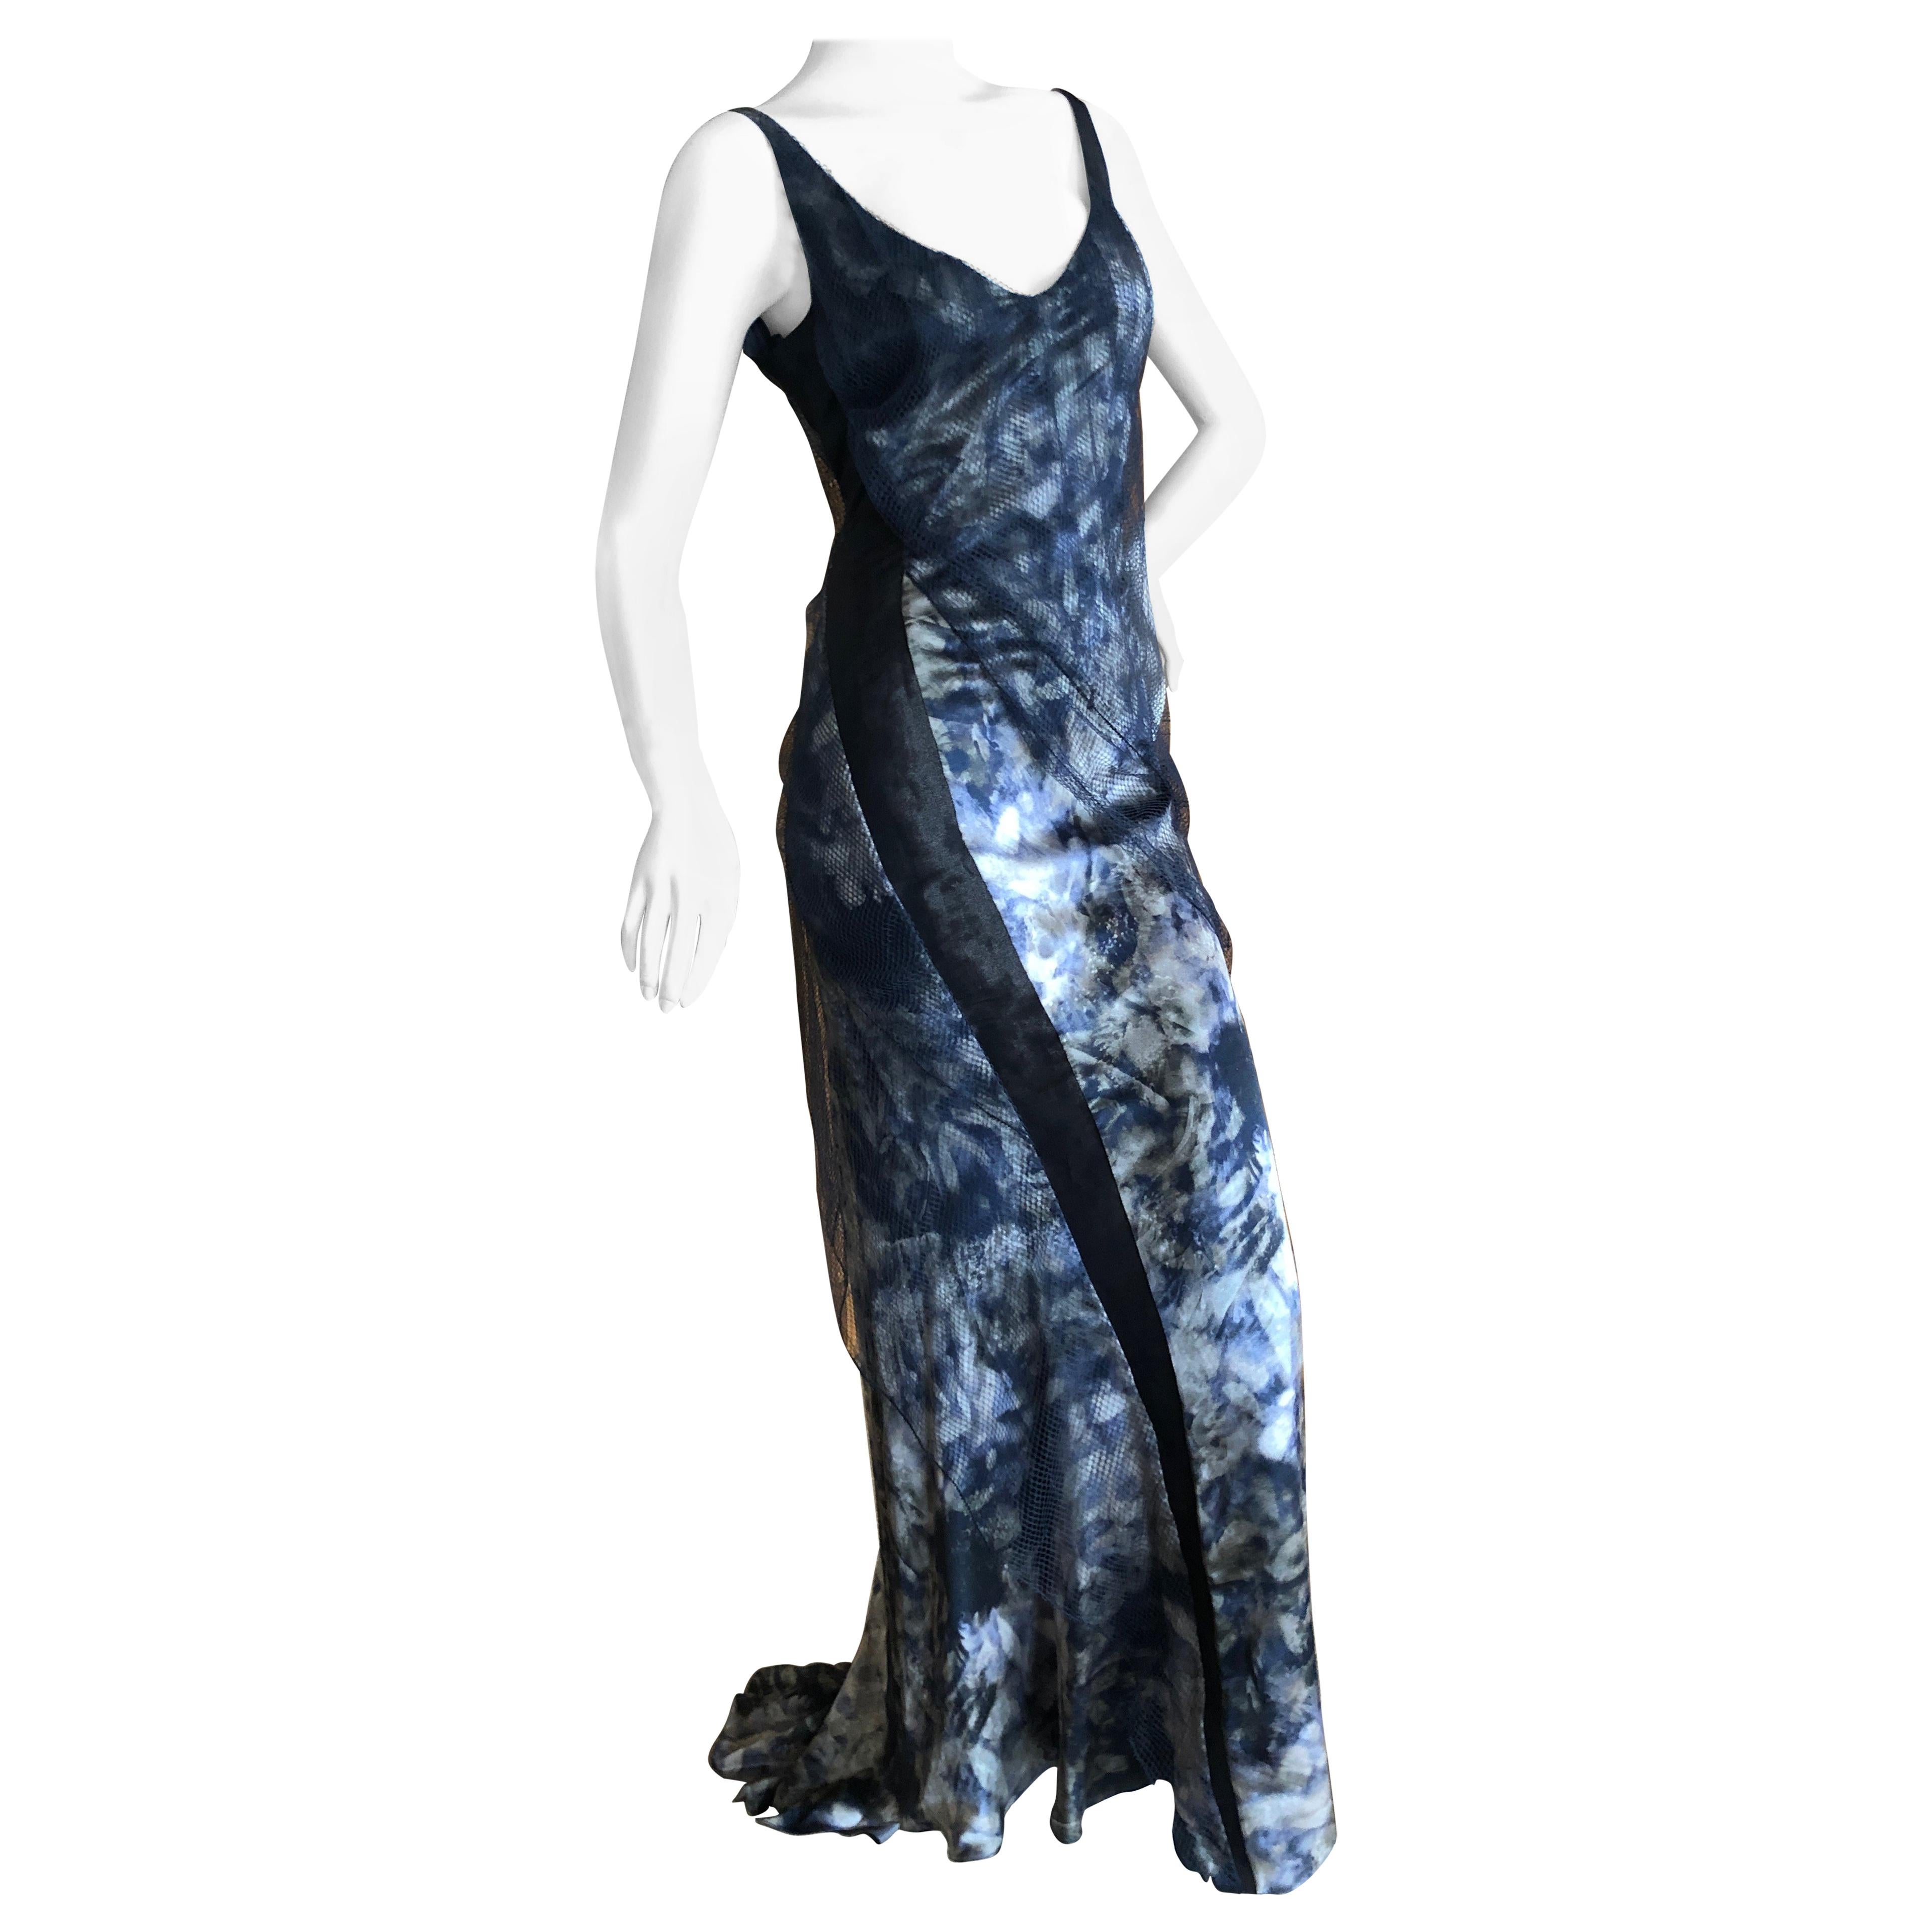 Nina Ricci by Olivier Theyskens Silk Floral Evening Dress w Net Overlay  New Tag For Sale